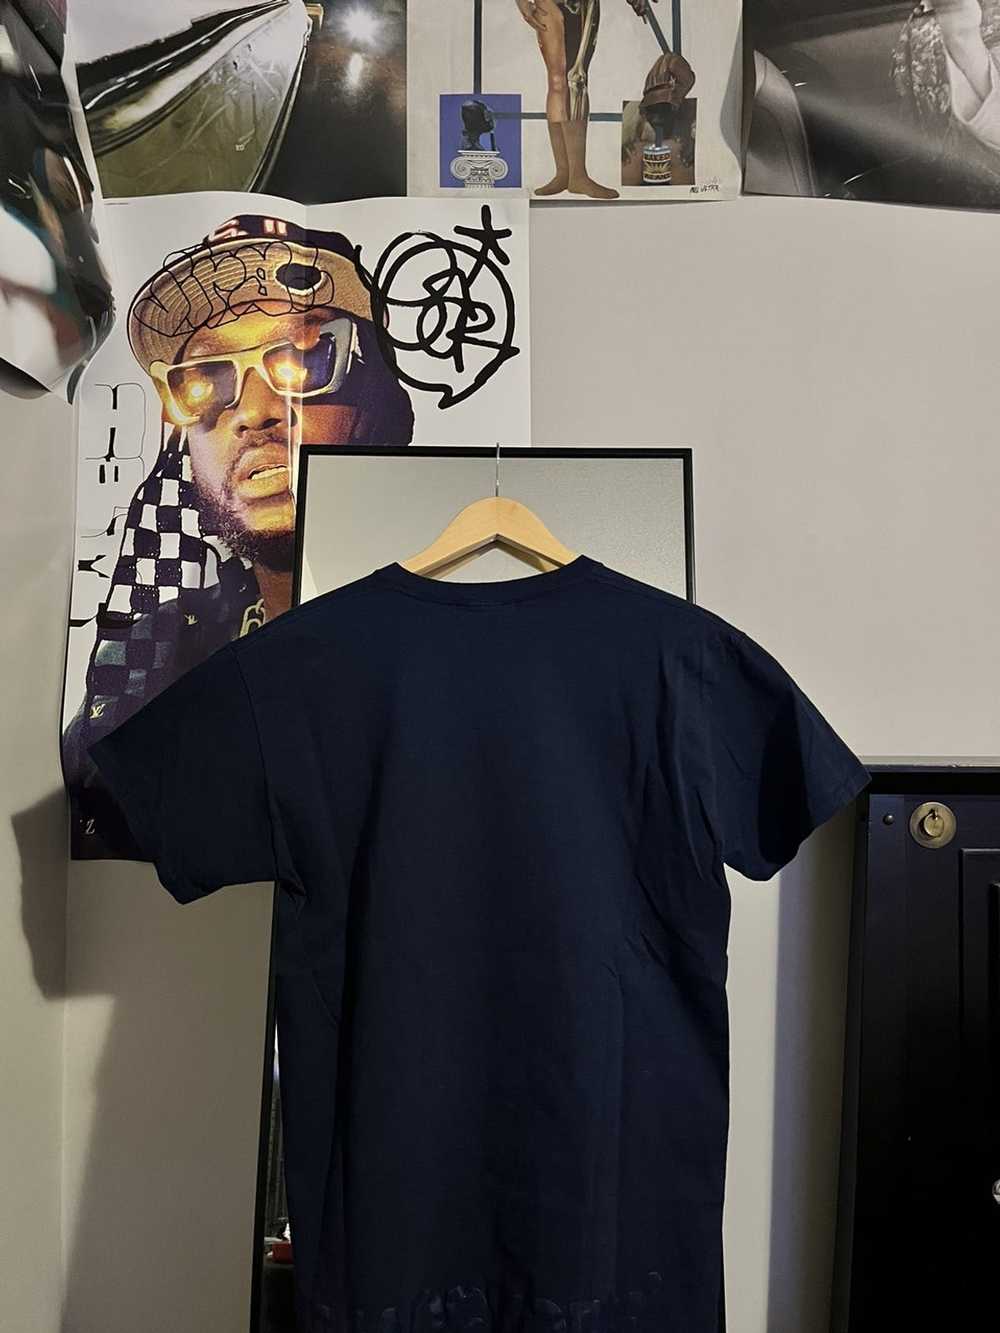 Undercover Undercover Madstore tee - image 2